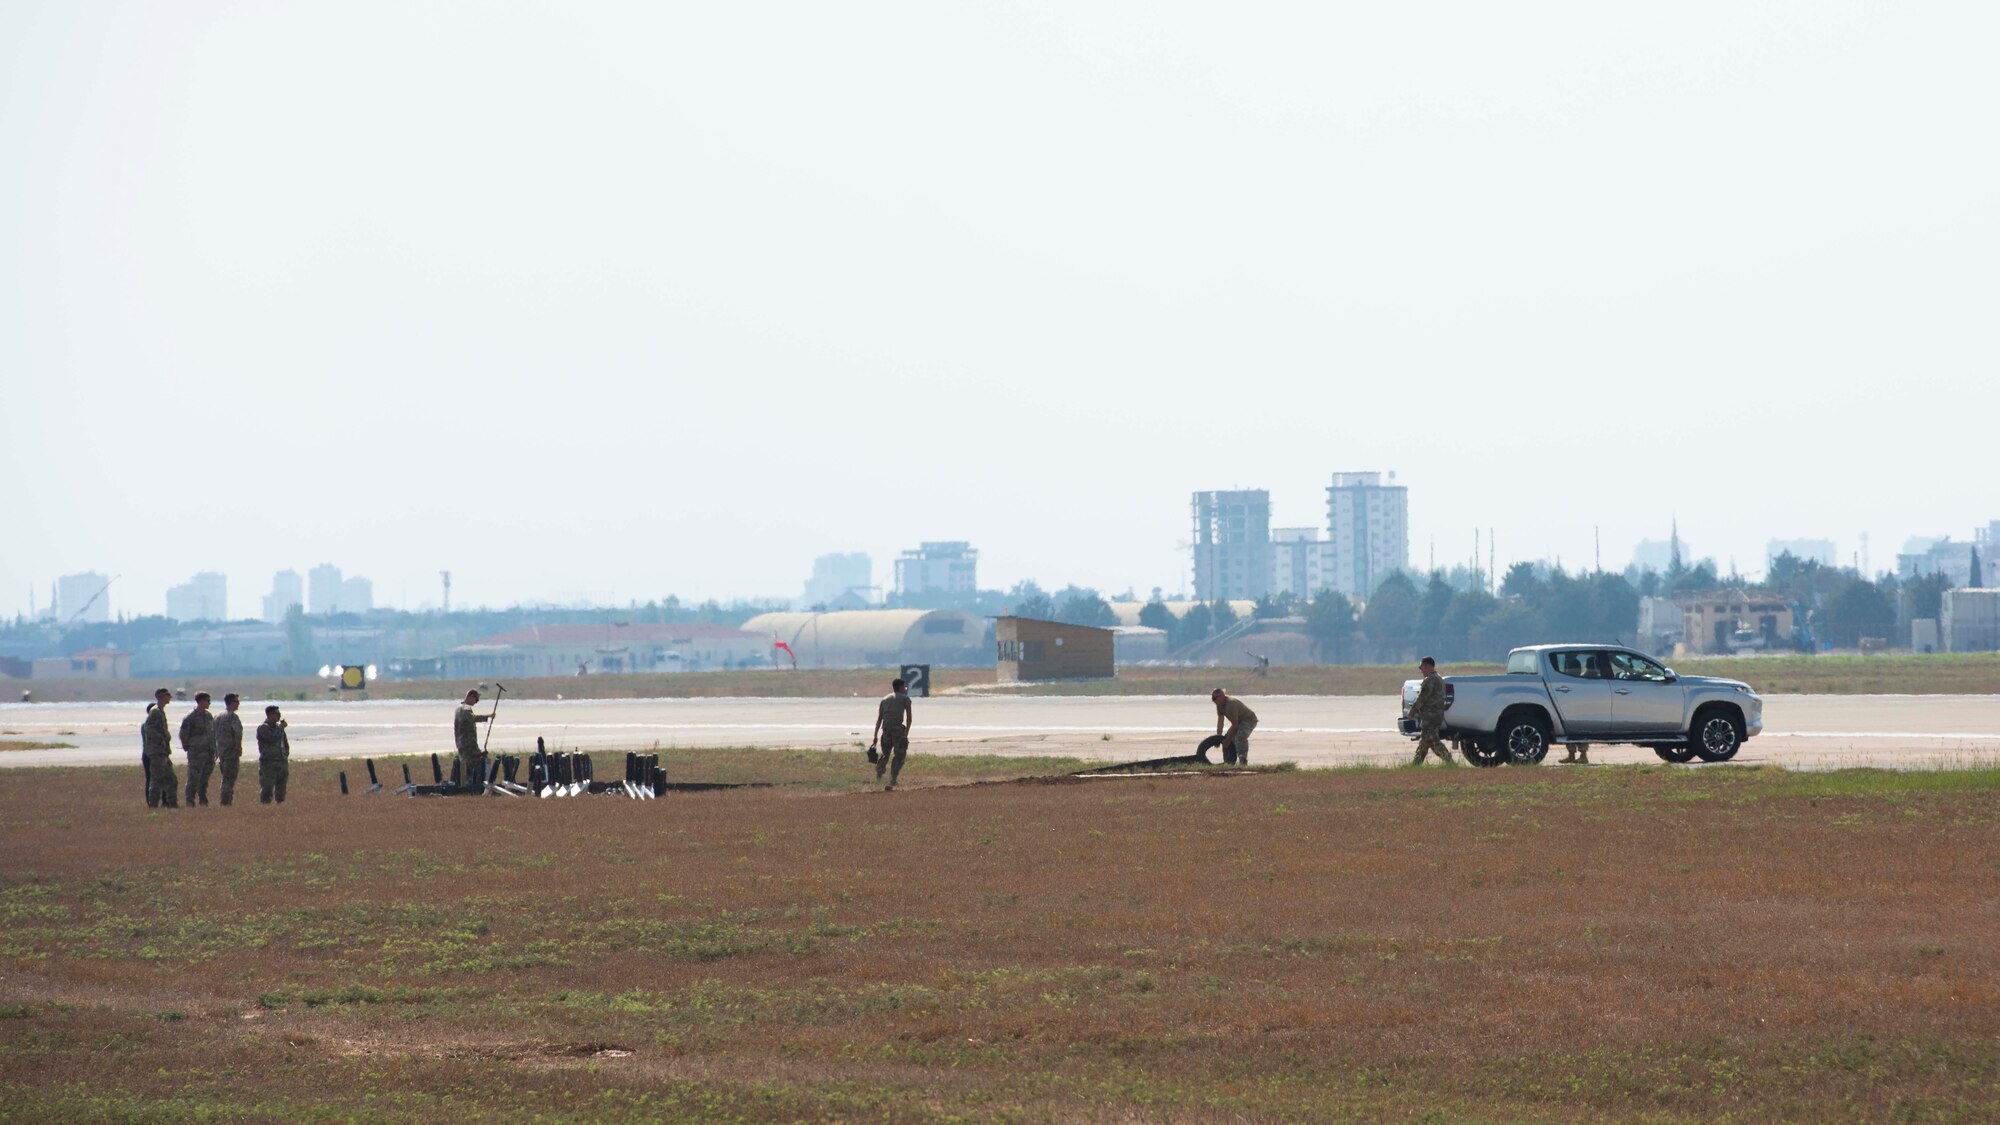 U.S. Airmen install machinery next to a runway. Buildings of the city of Adana are in the background.